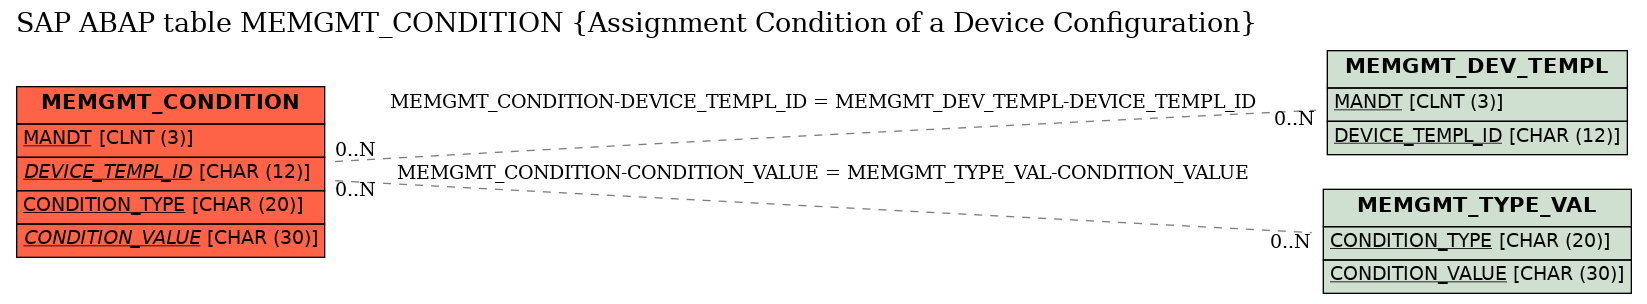 E-R Diagram for table MEMGMT_CONDITION (Assignment Condition of a Device Configuration)